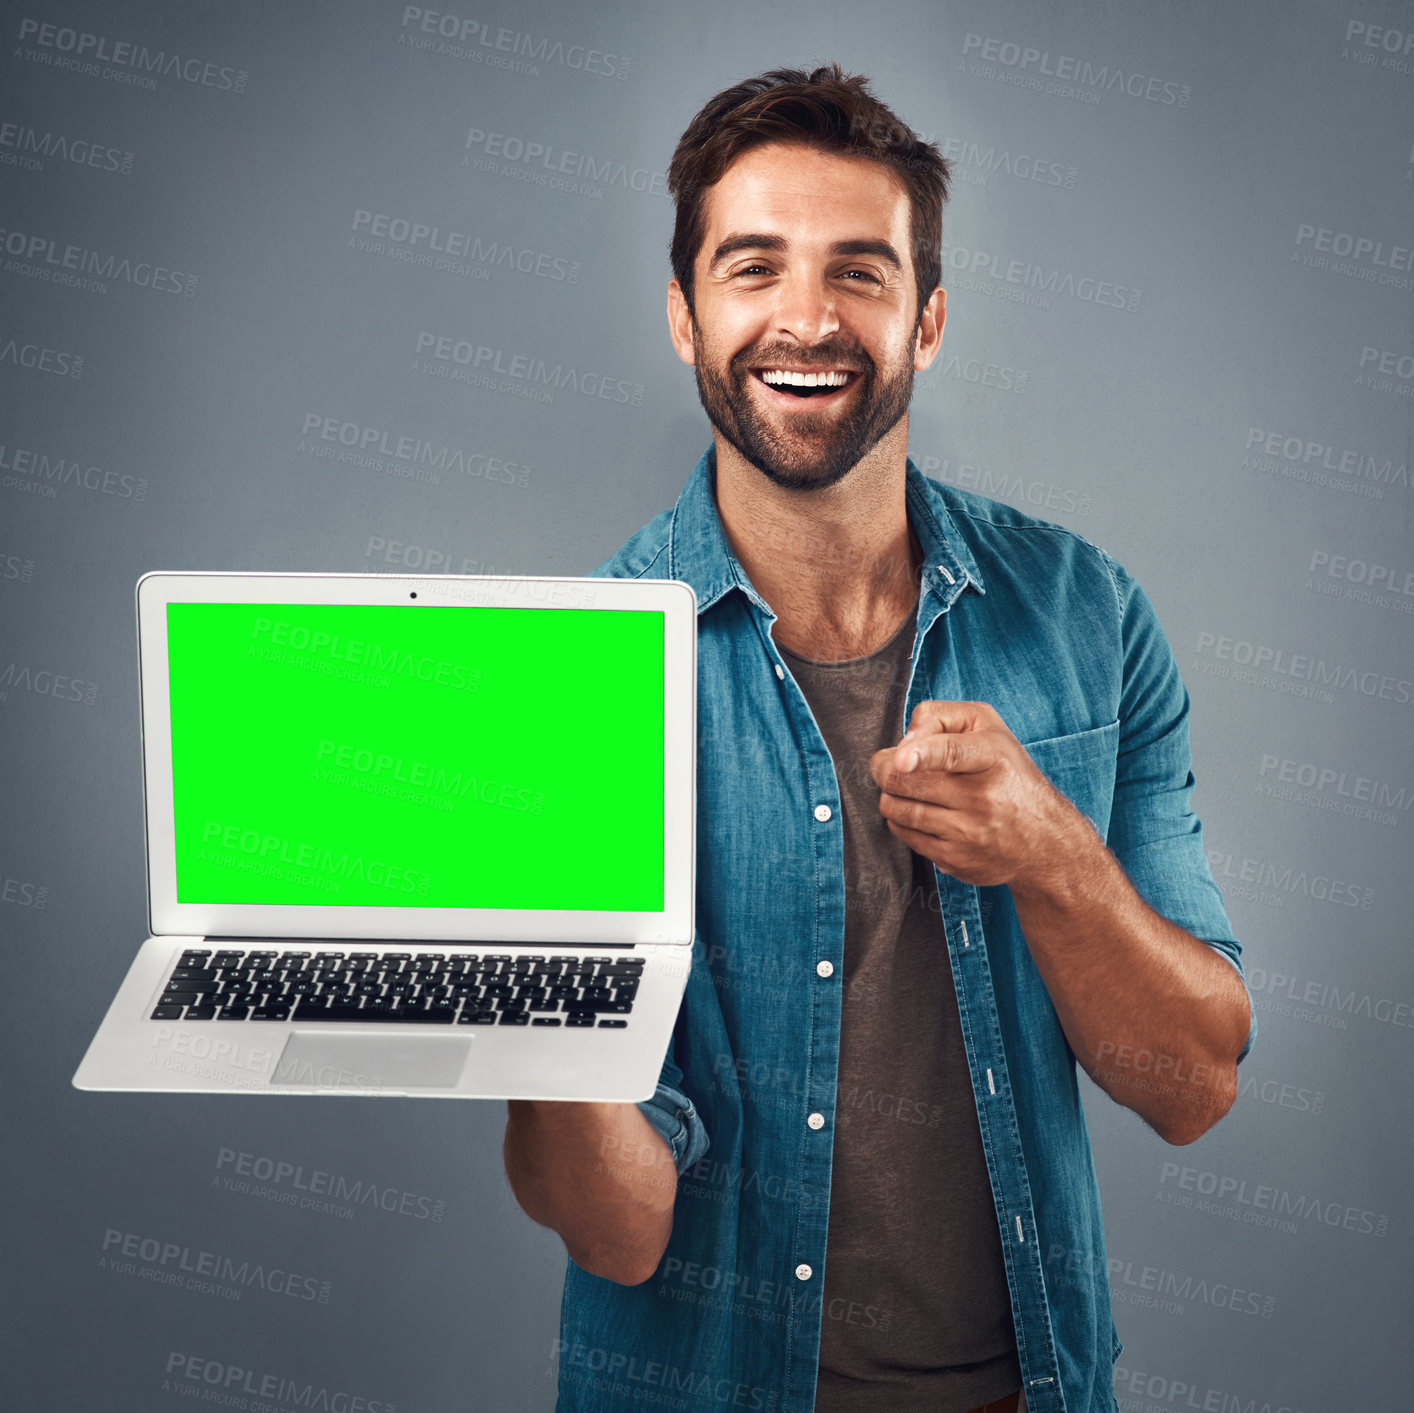 Buy stock photo Happy man, laptop and pointing with green screen in advertising or marketing against a grey studio background. Portrait of male person showing computer display, mockup or copy space for advertisement